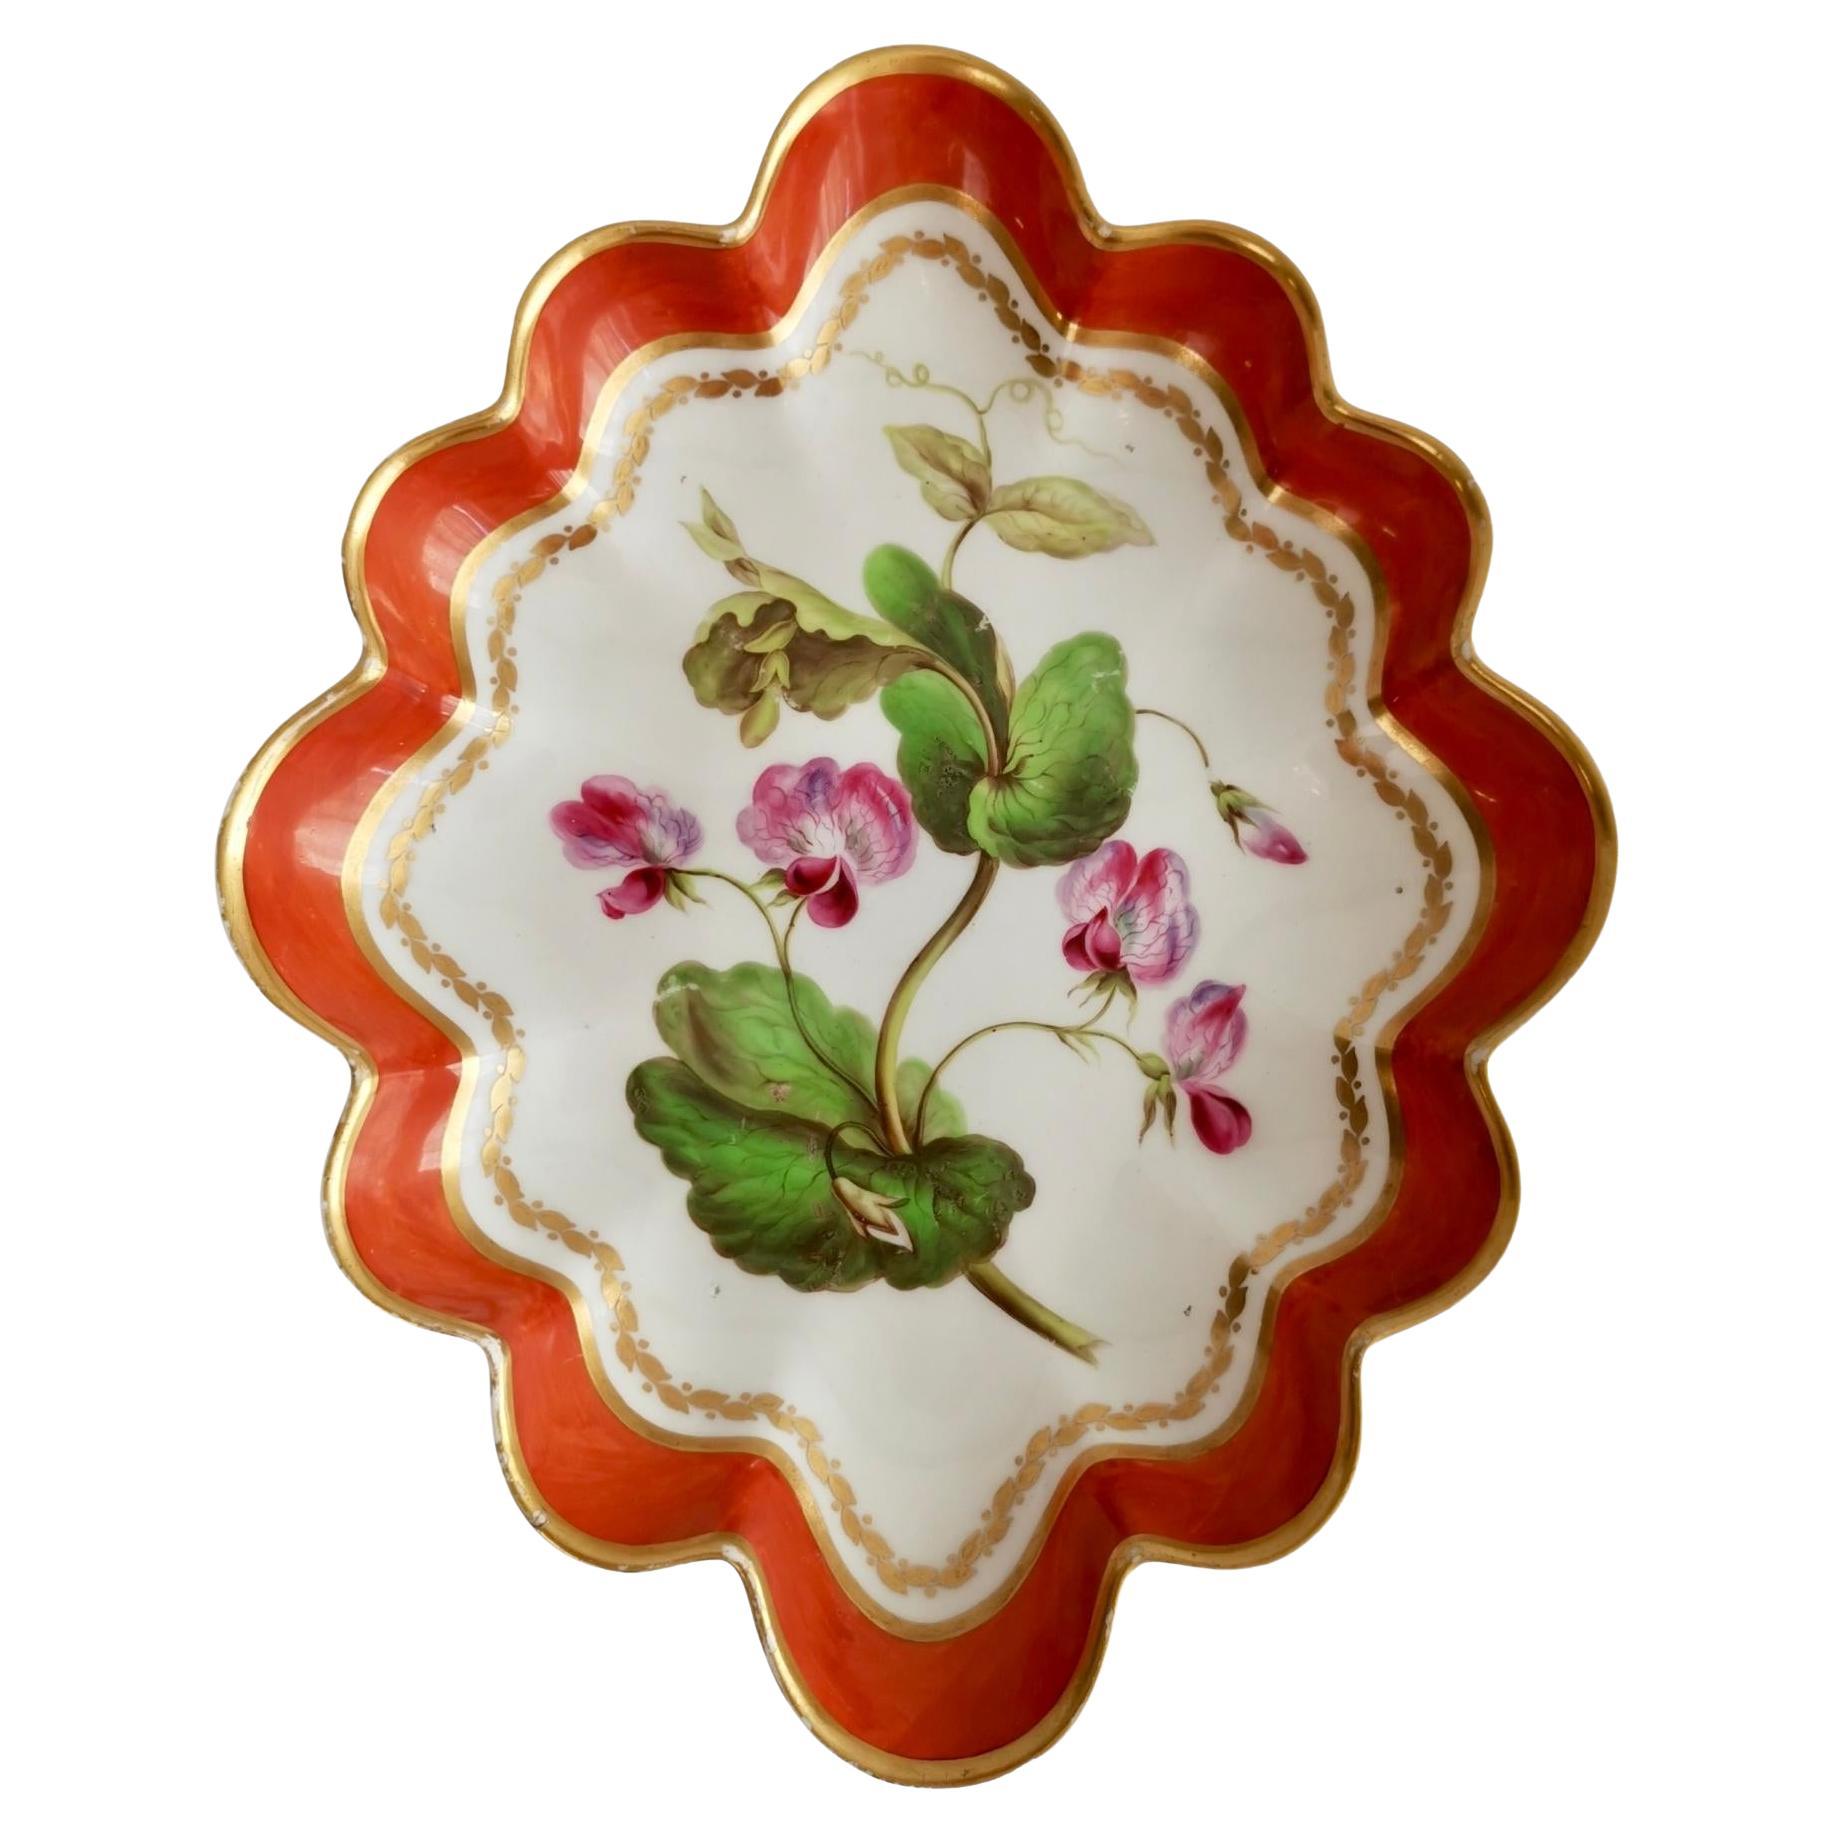 Derby Lobed Porcelain Dish, Red with Botanical Painting John Brewer, 1795-1800